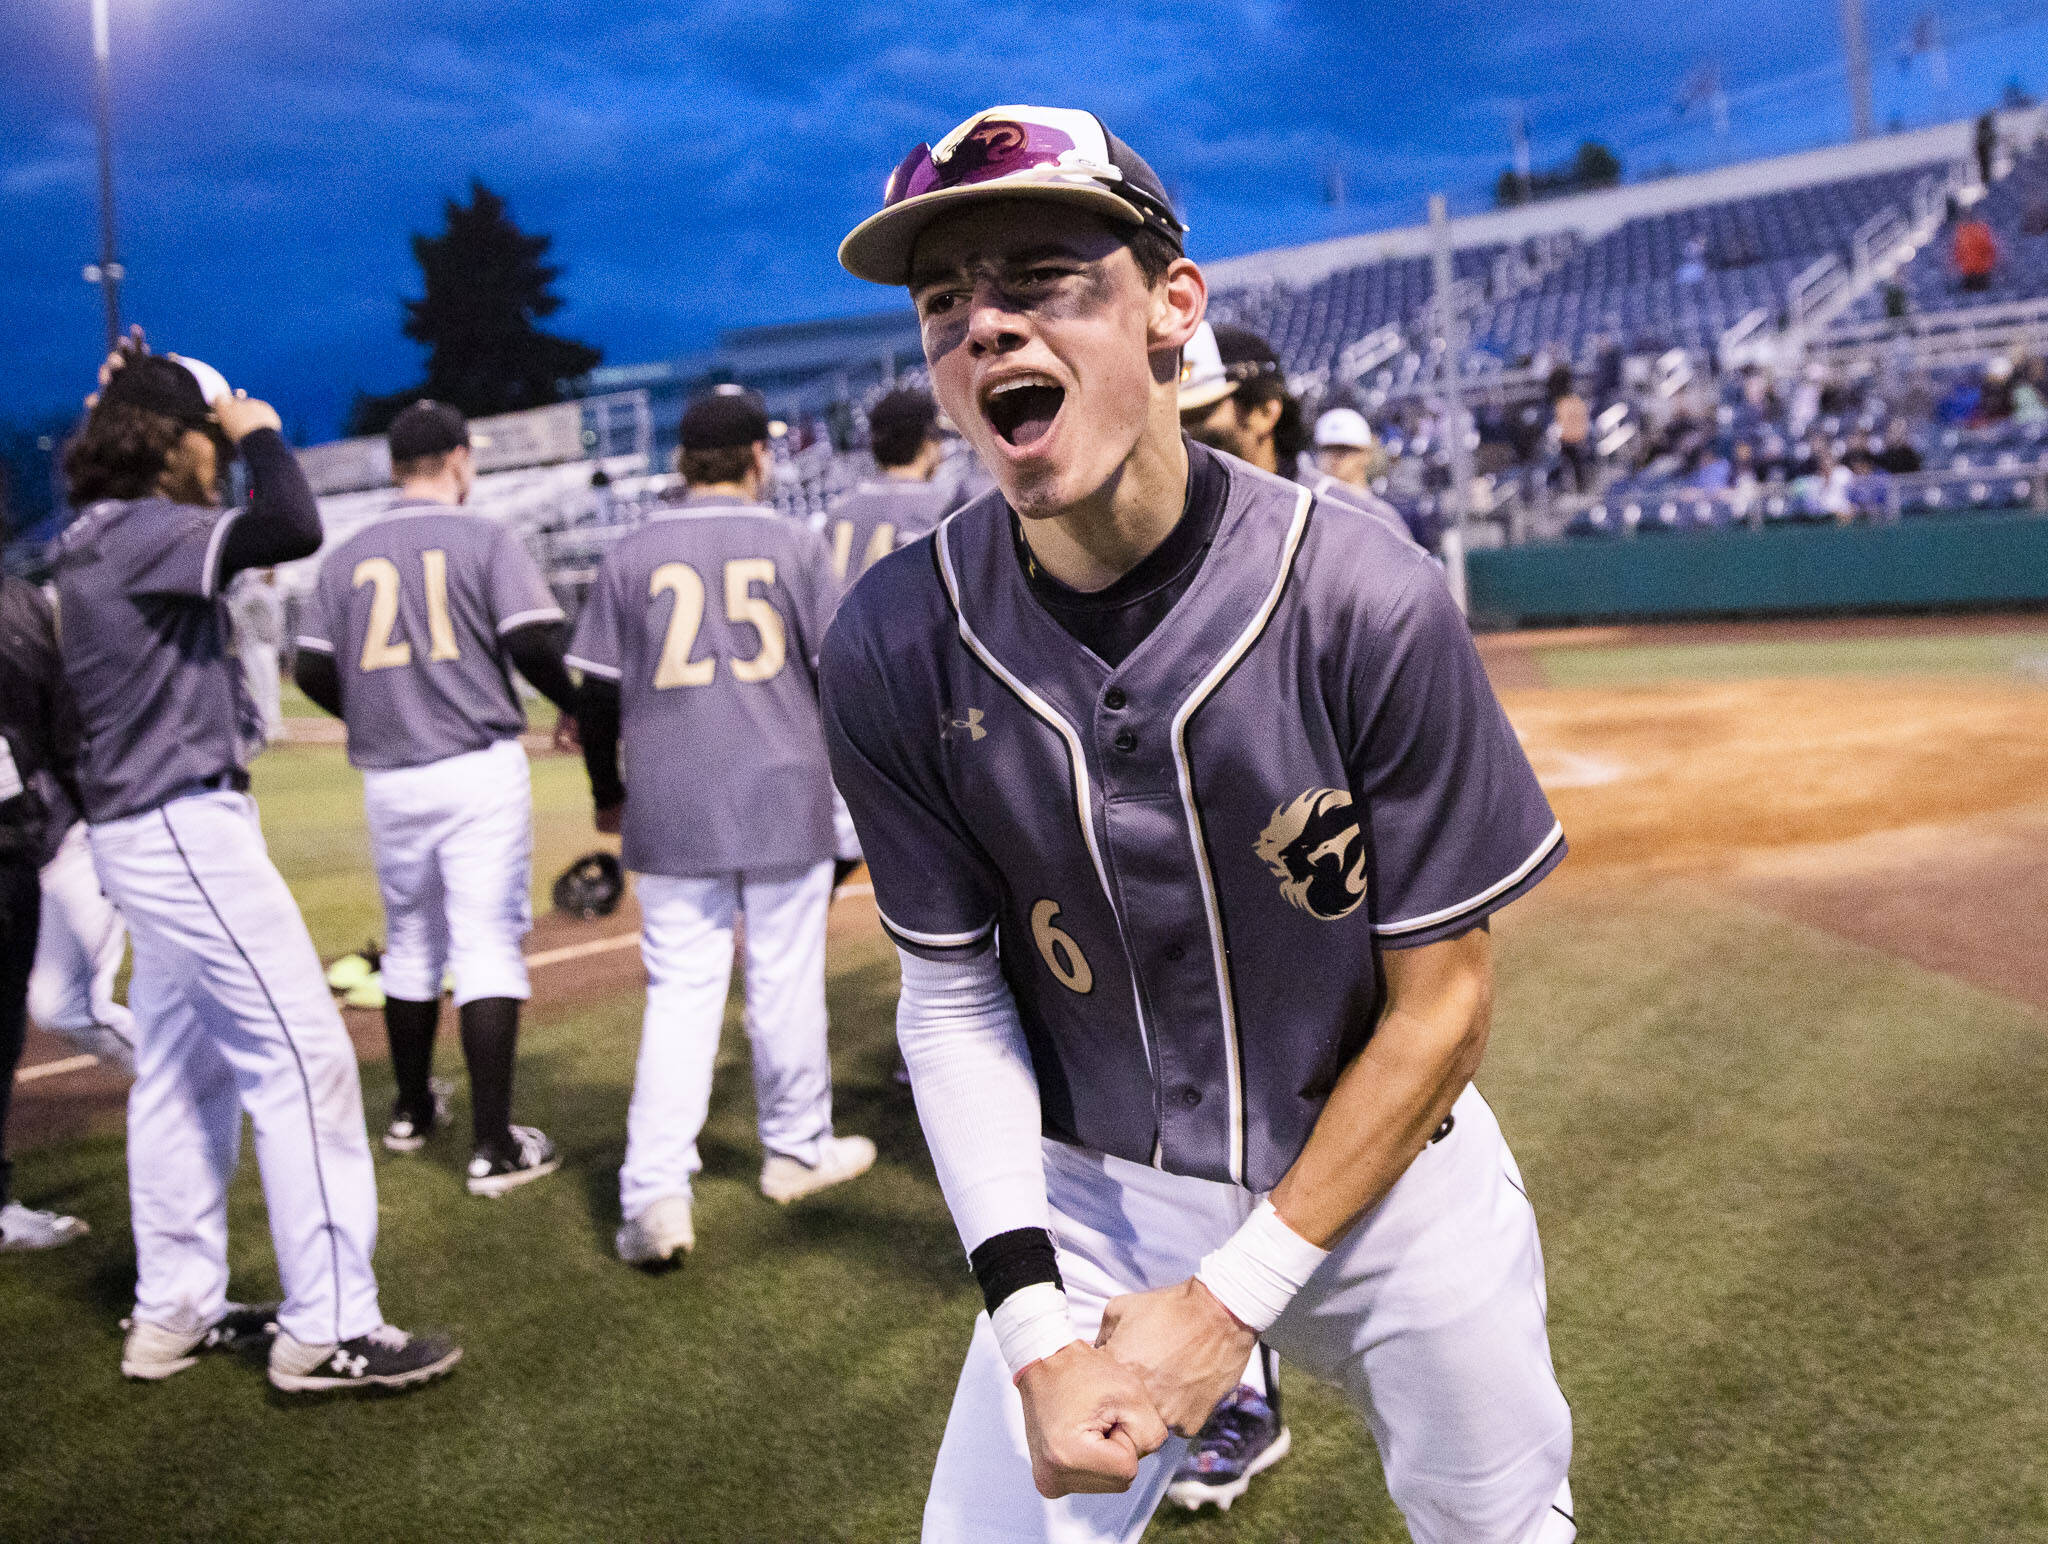 Lynnwood sophomore Jace Hampson yells in celebration after the Royals clinched a state berth with a 3-2 win over Meadowdale in a Class 3A District 1 Tournament semifinal Tuesday night at Funko Field. (Olivia Vanni / The Herald)